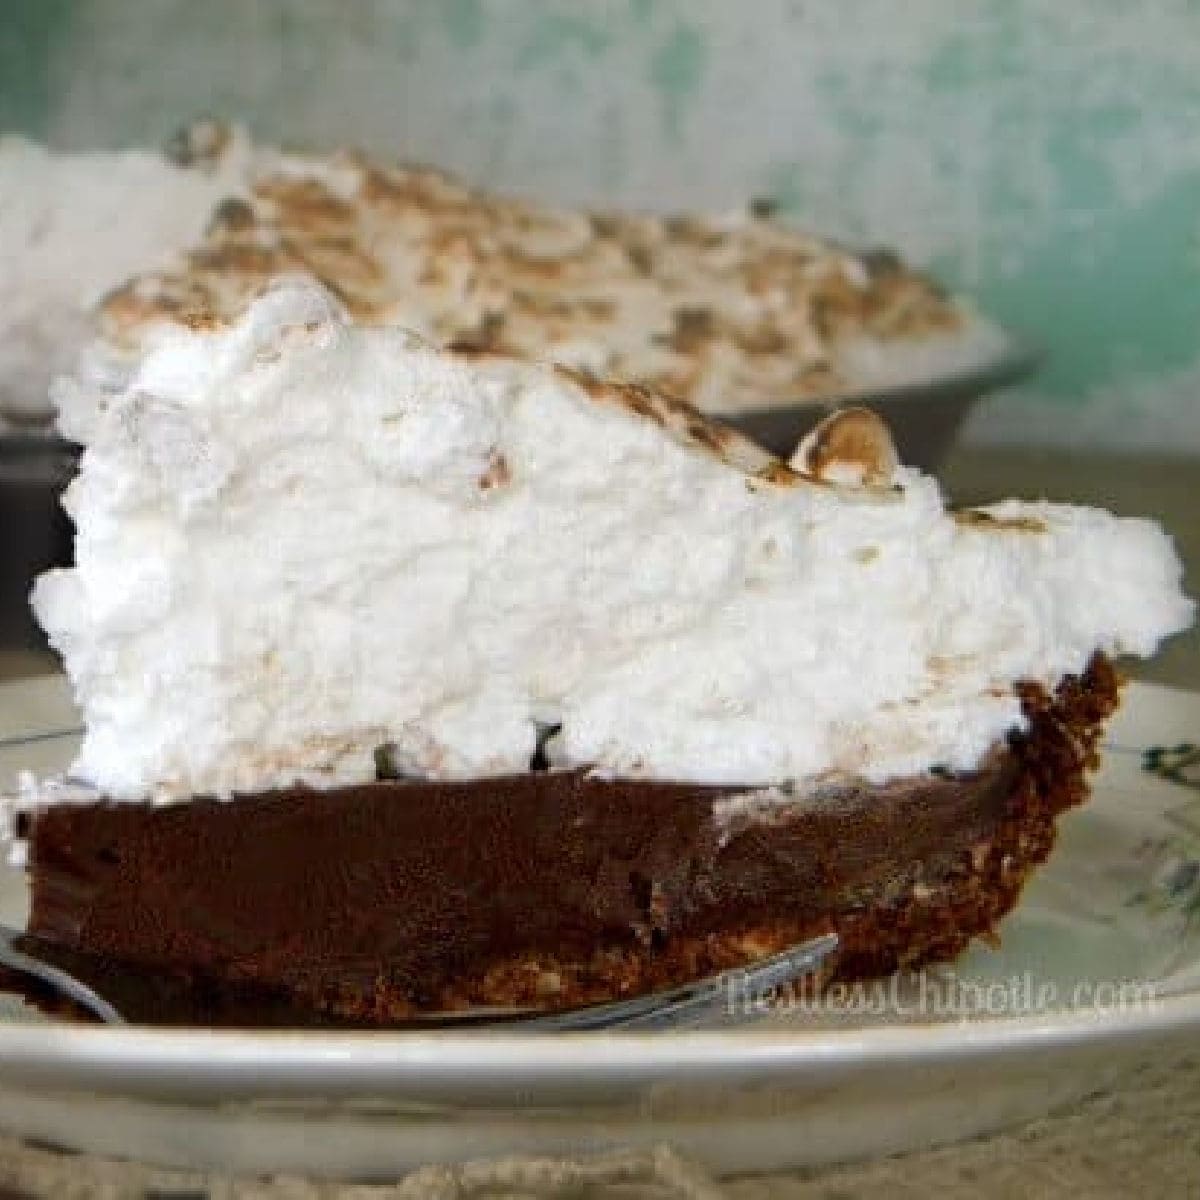 A closeup of a slice of chocolate pie showing layers of chocolate and meringue.